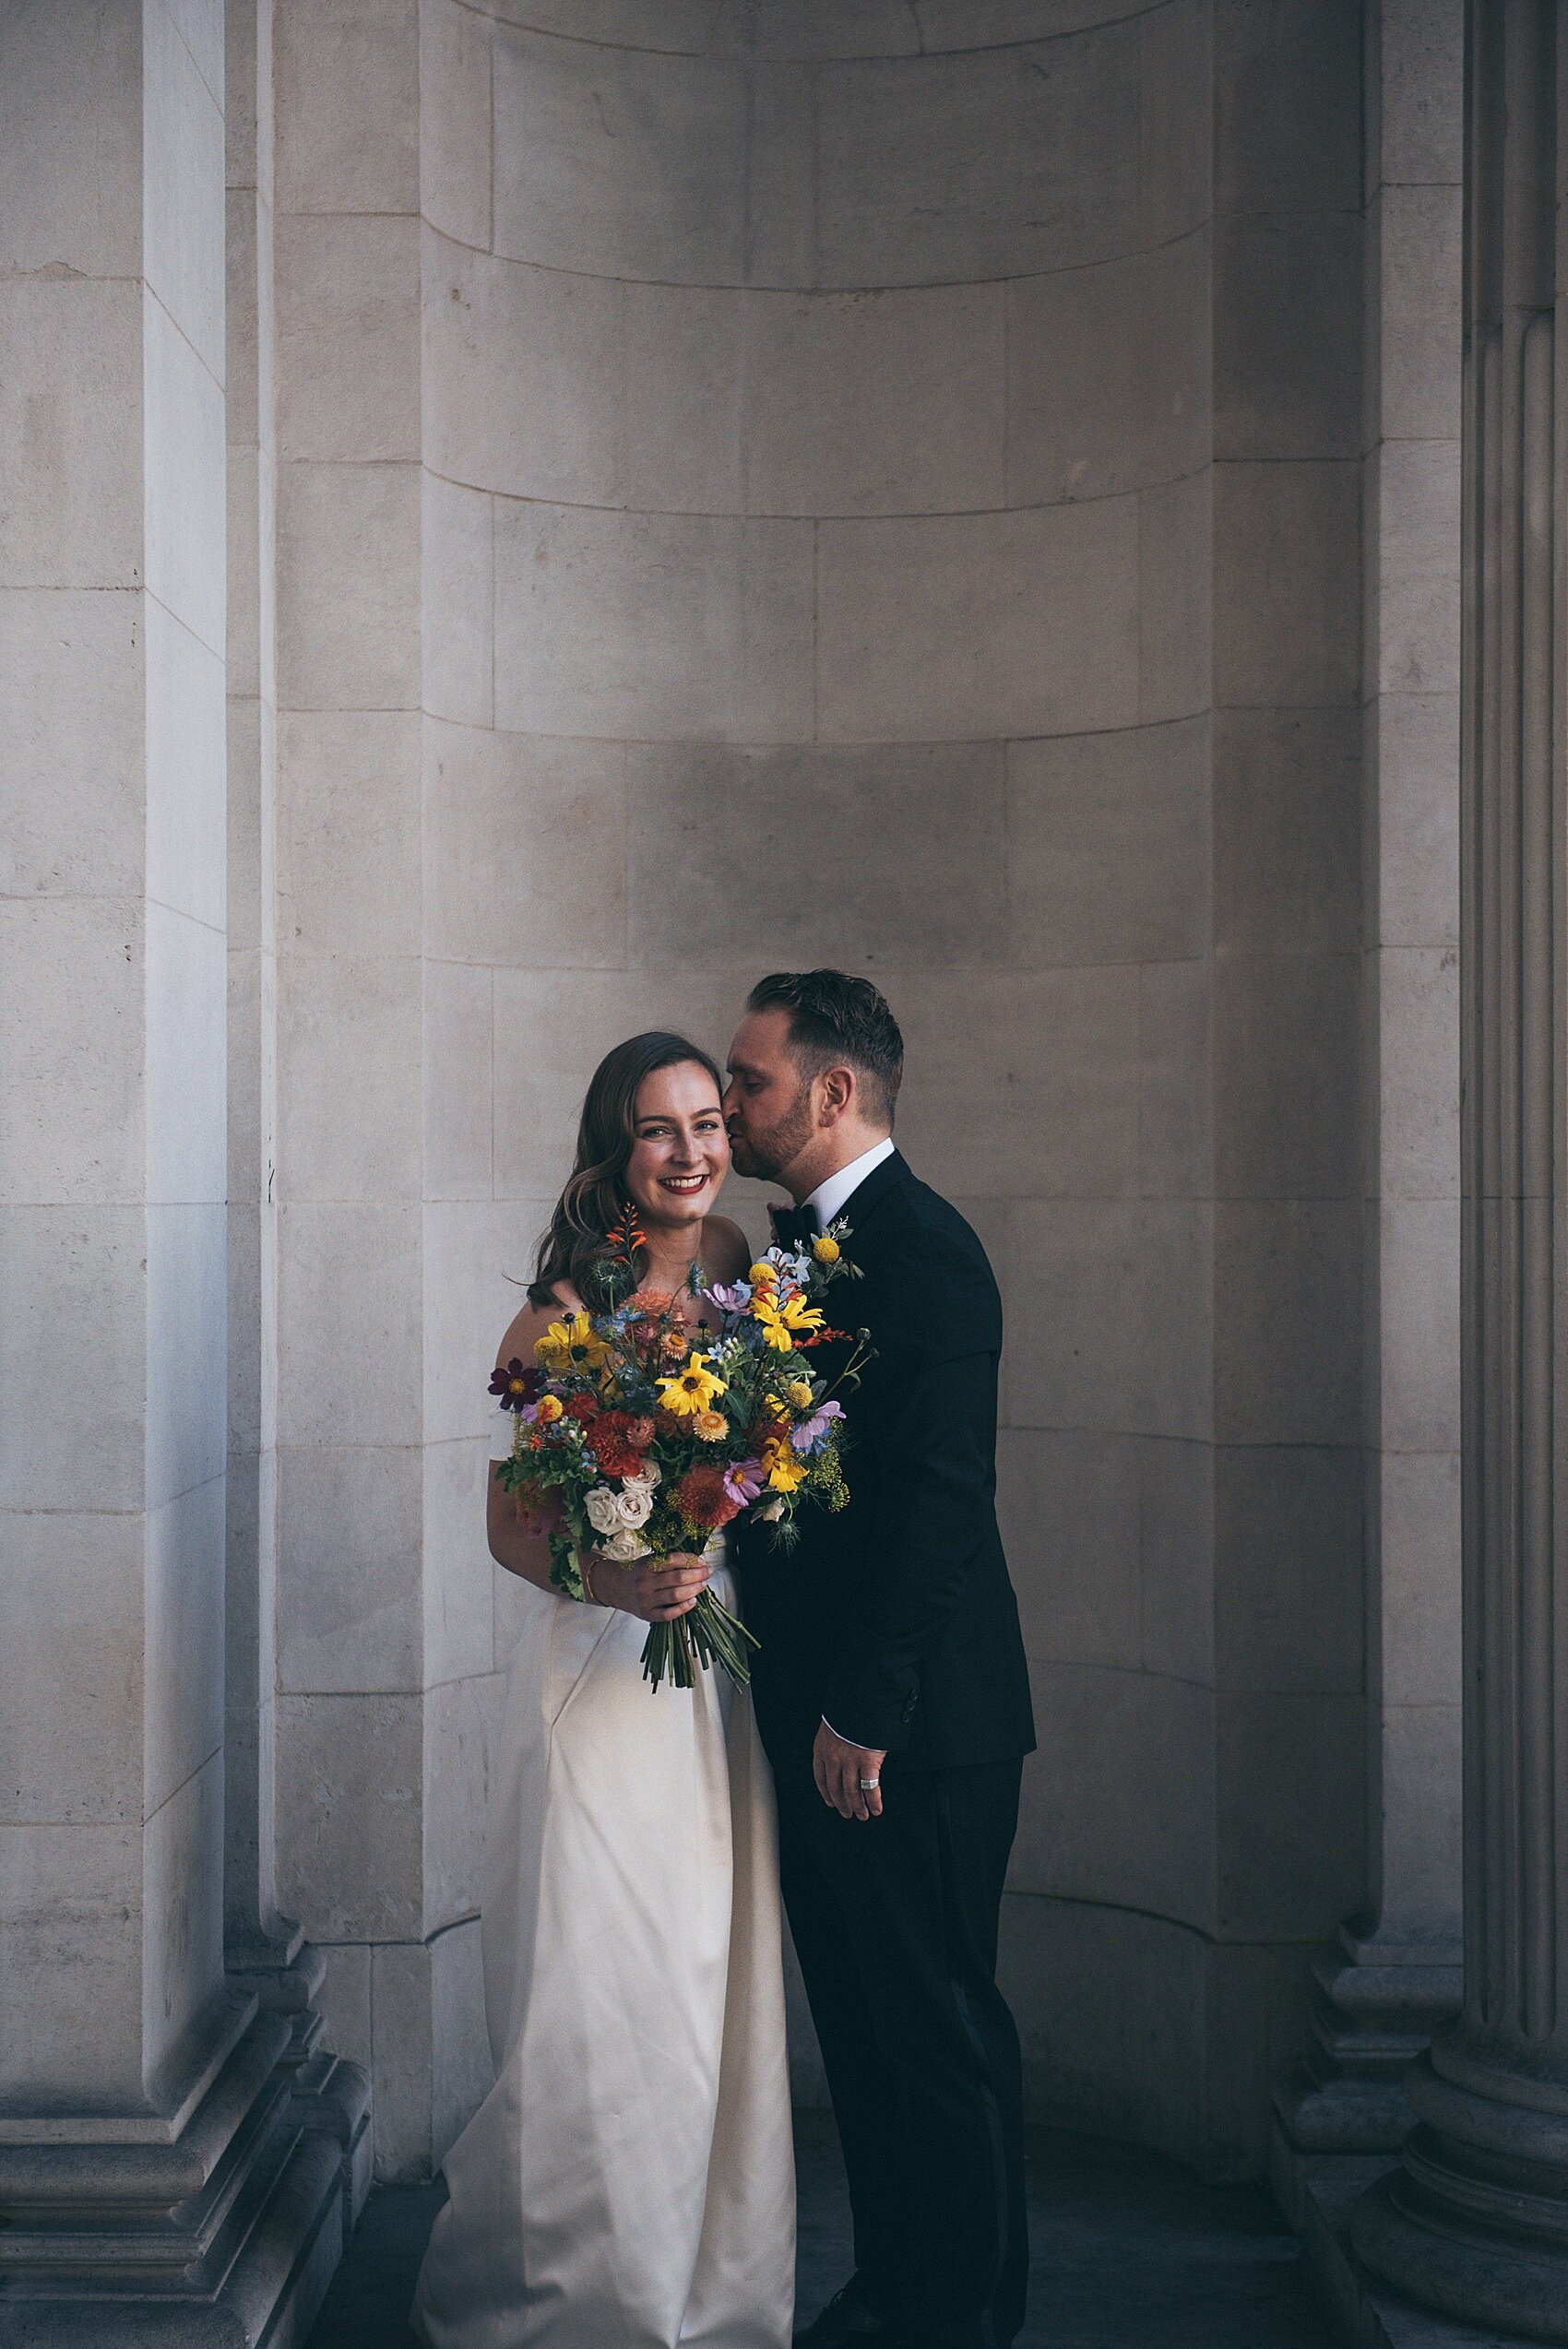 Beautiful bride Alice wore the Houston wide leg trousers and Kelly top by Halfpenny London for her wedding day